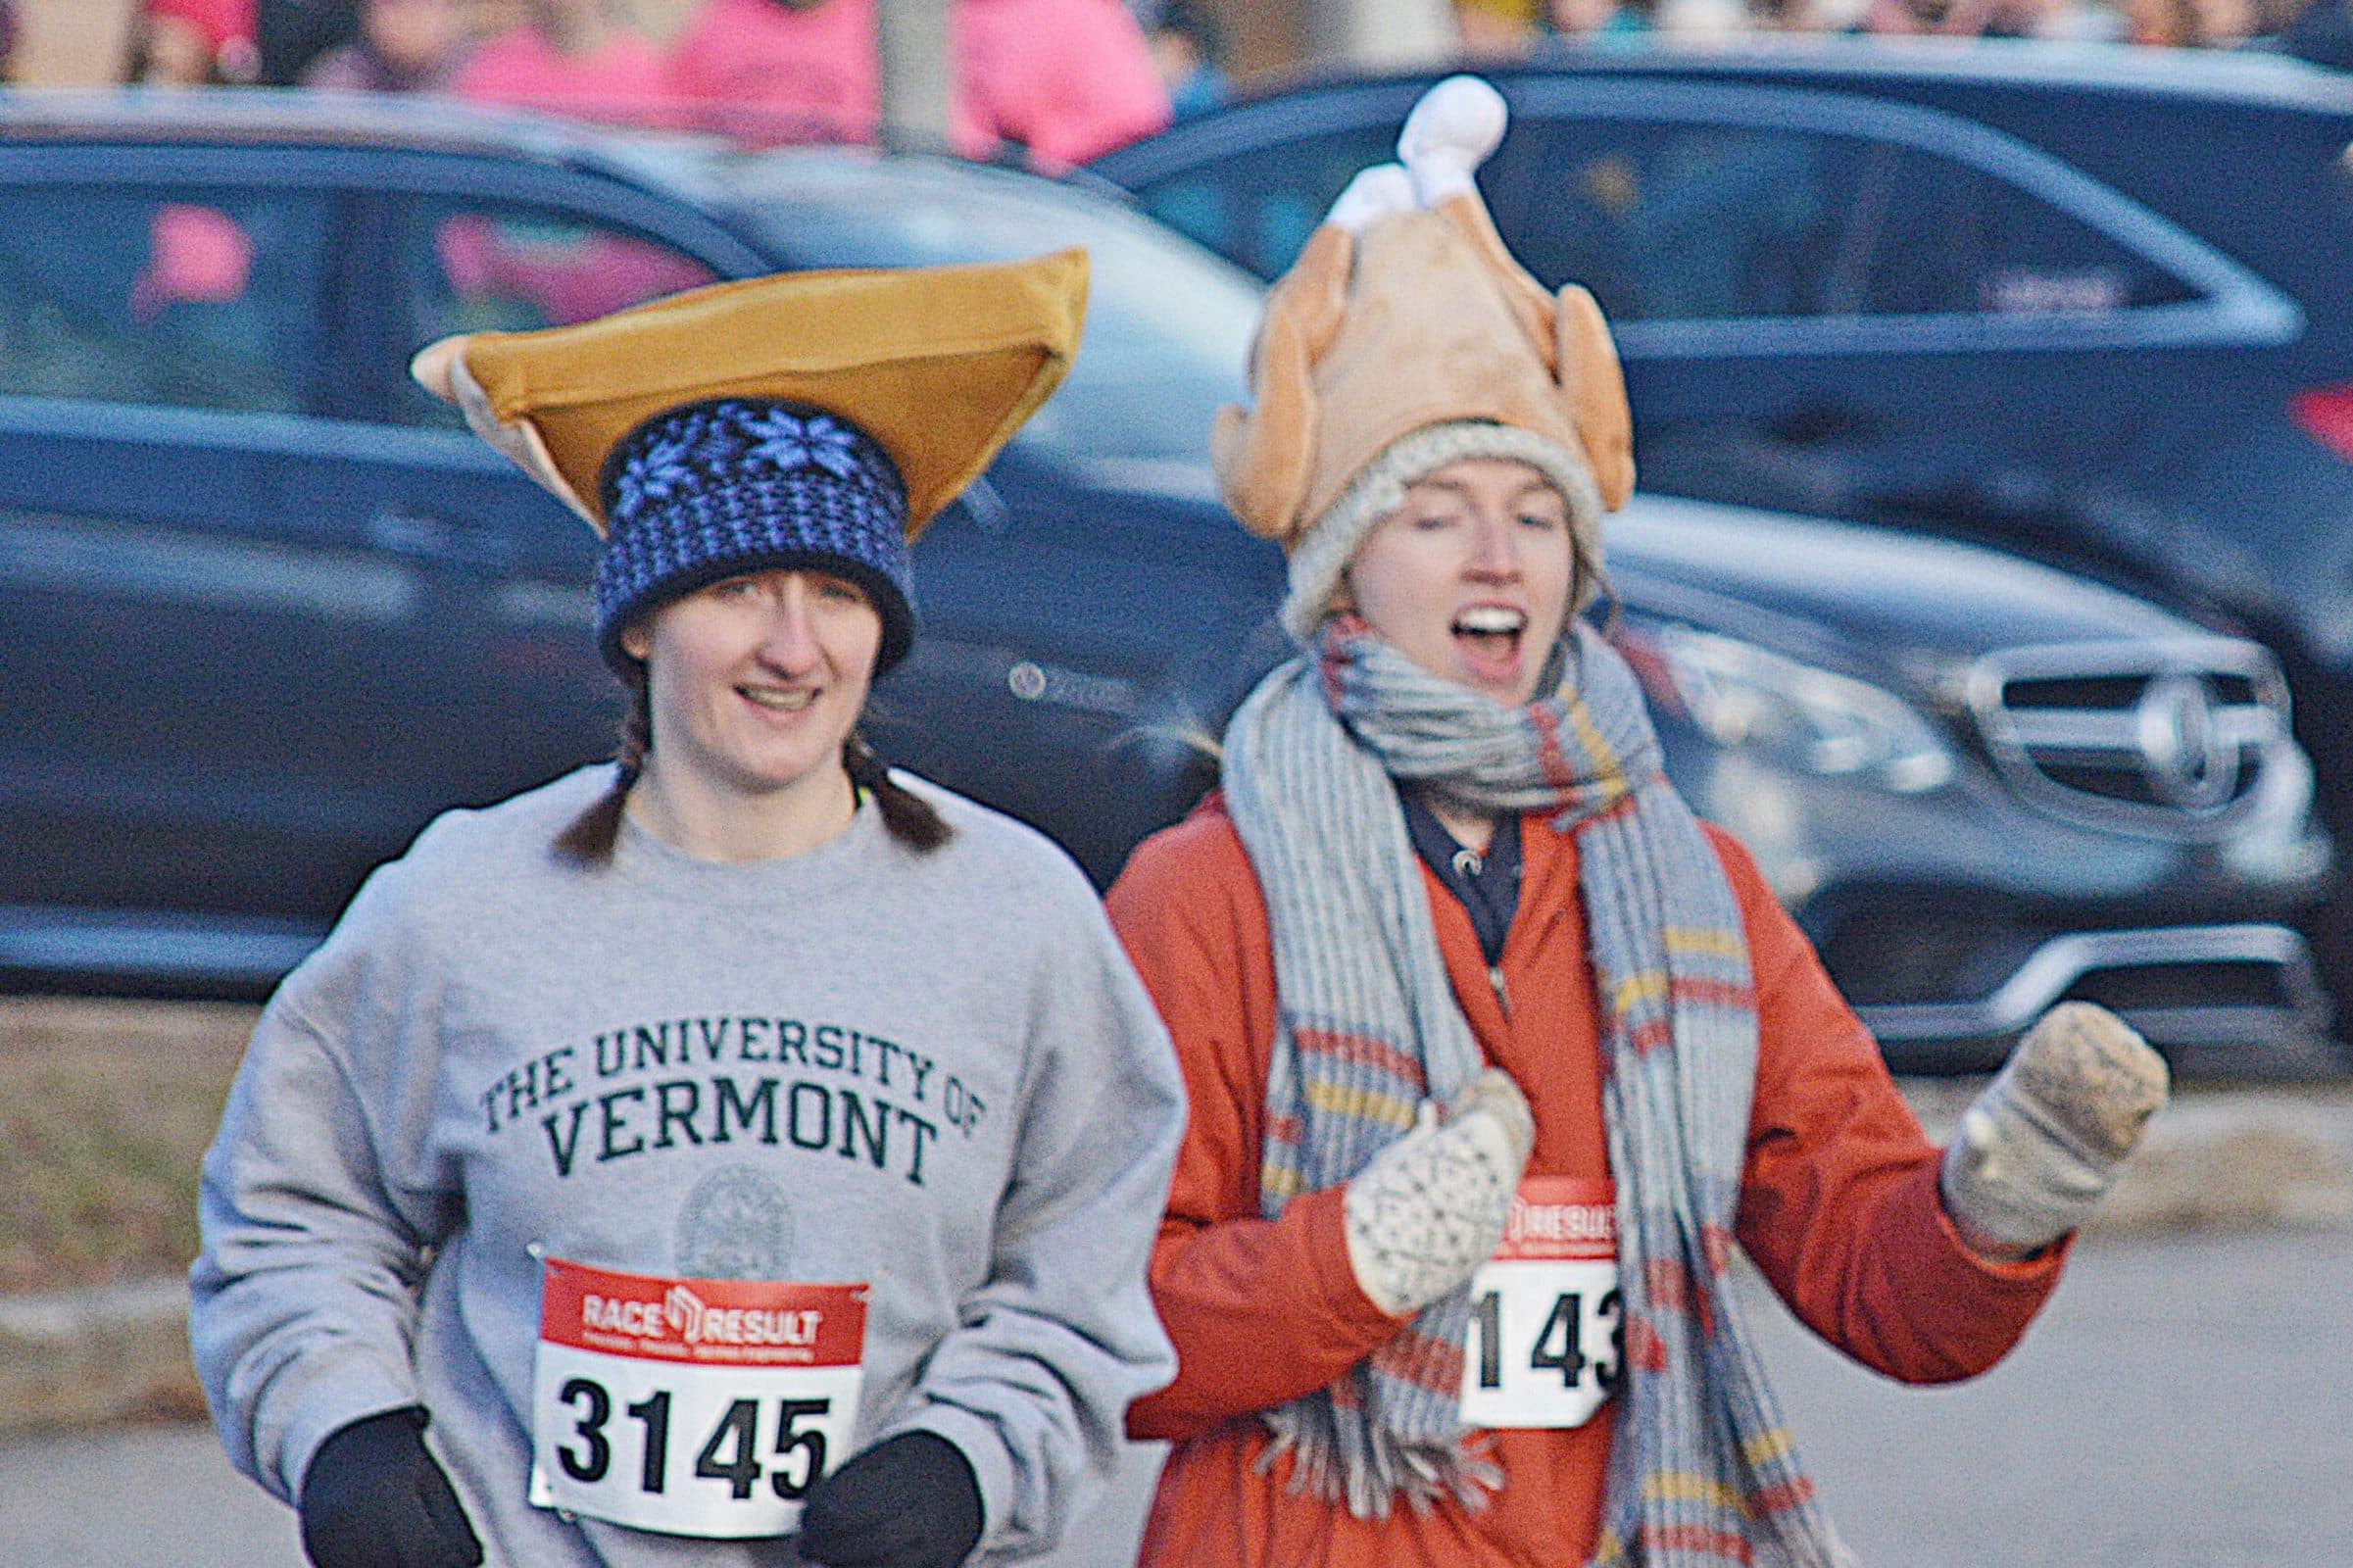 Sign up for Gobble Wobble